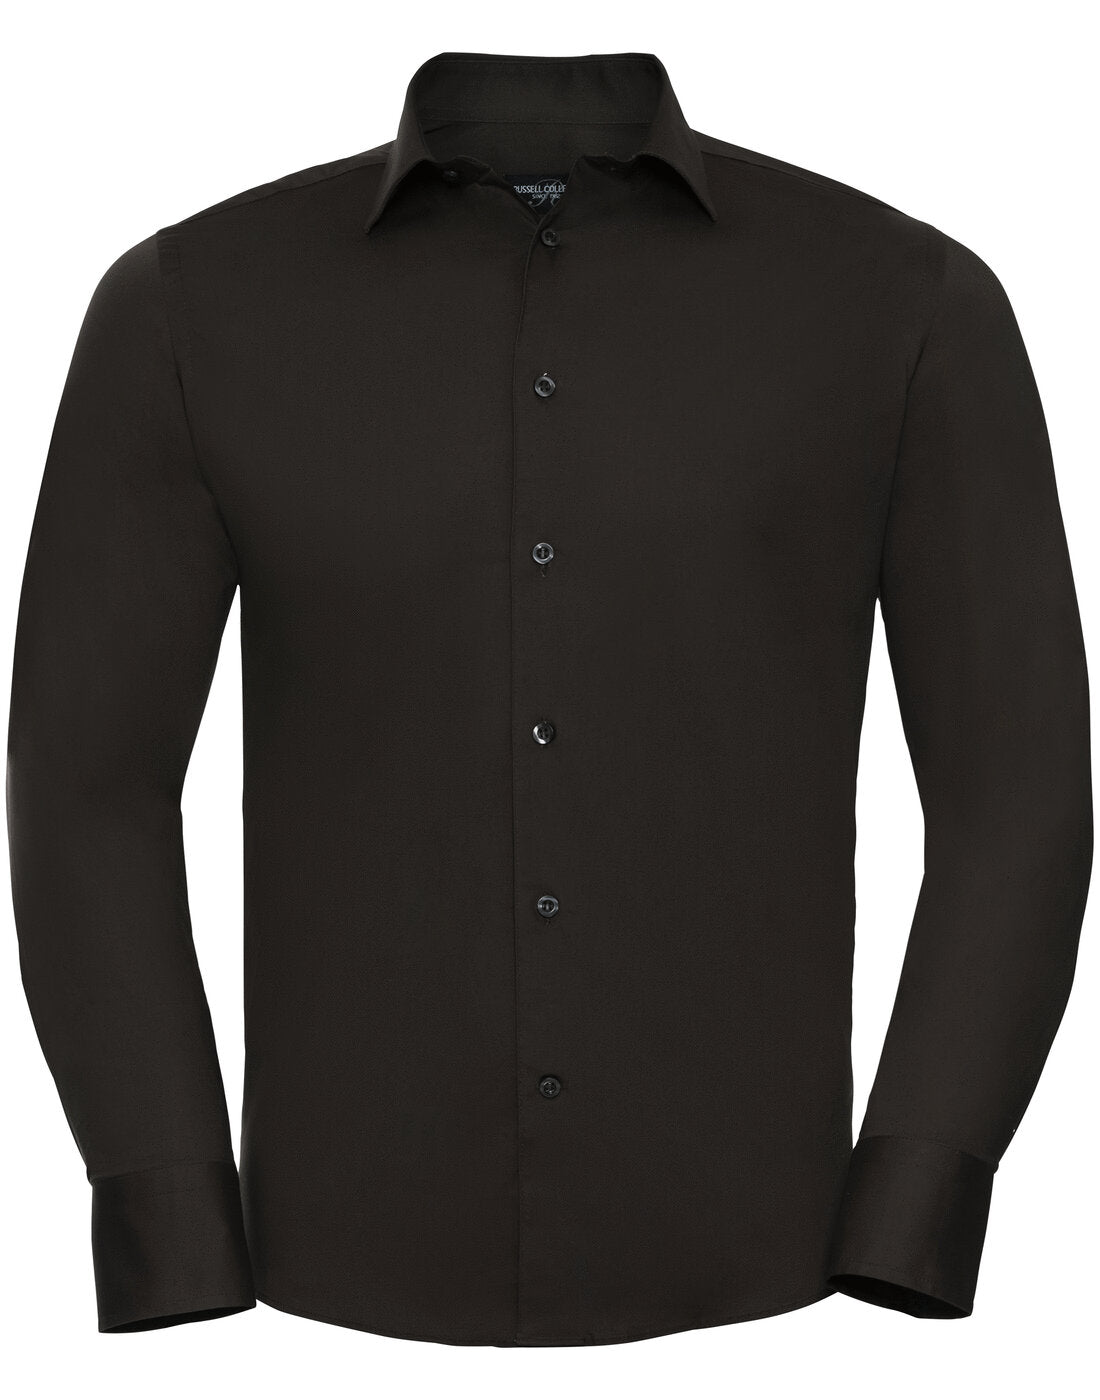 Russell Mens Long Sleeve Fitted Stretch Shirt Chocolate